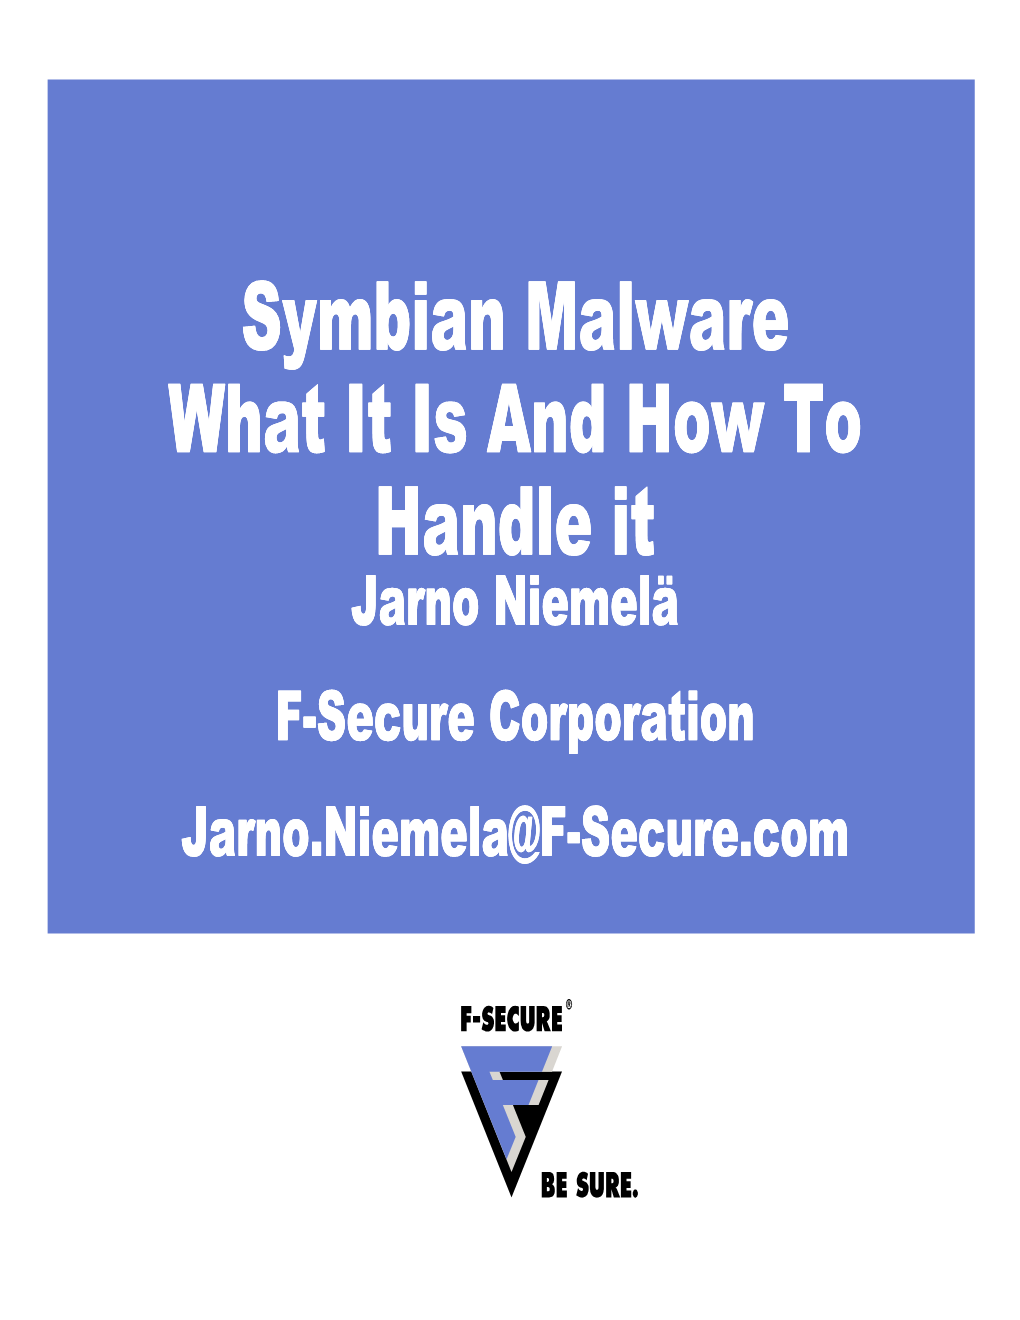 Symbian Malware What It Is and How to Handle It